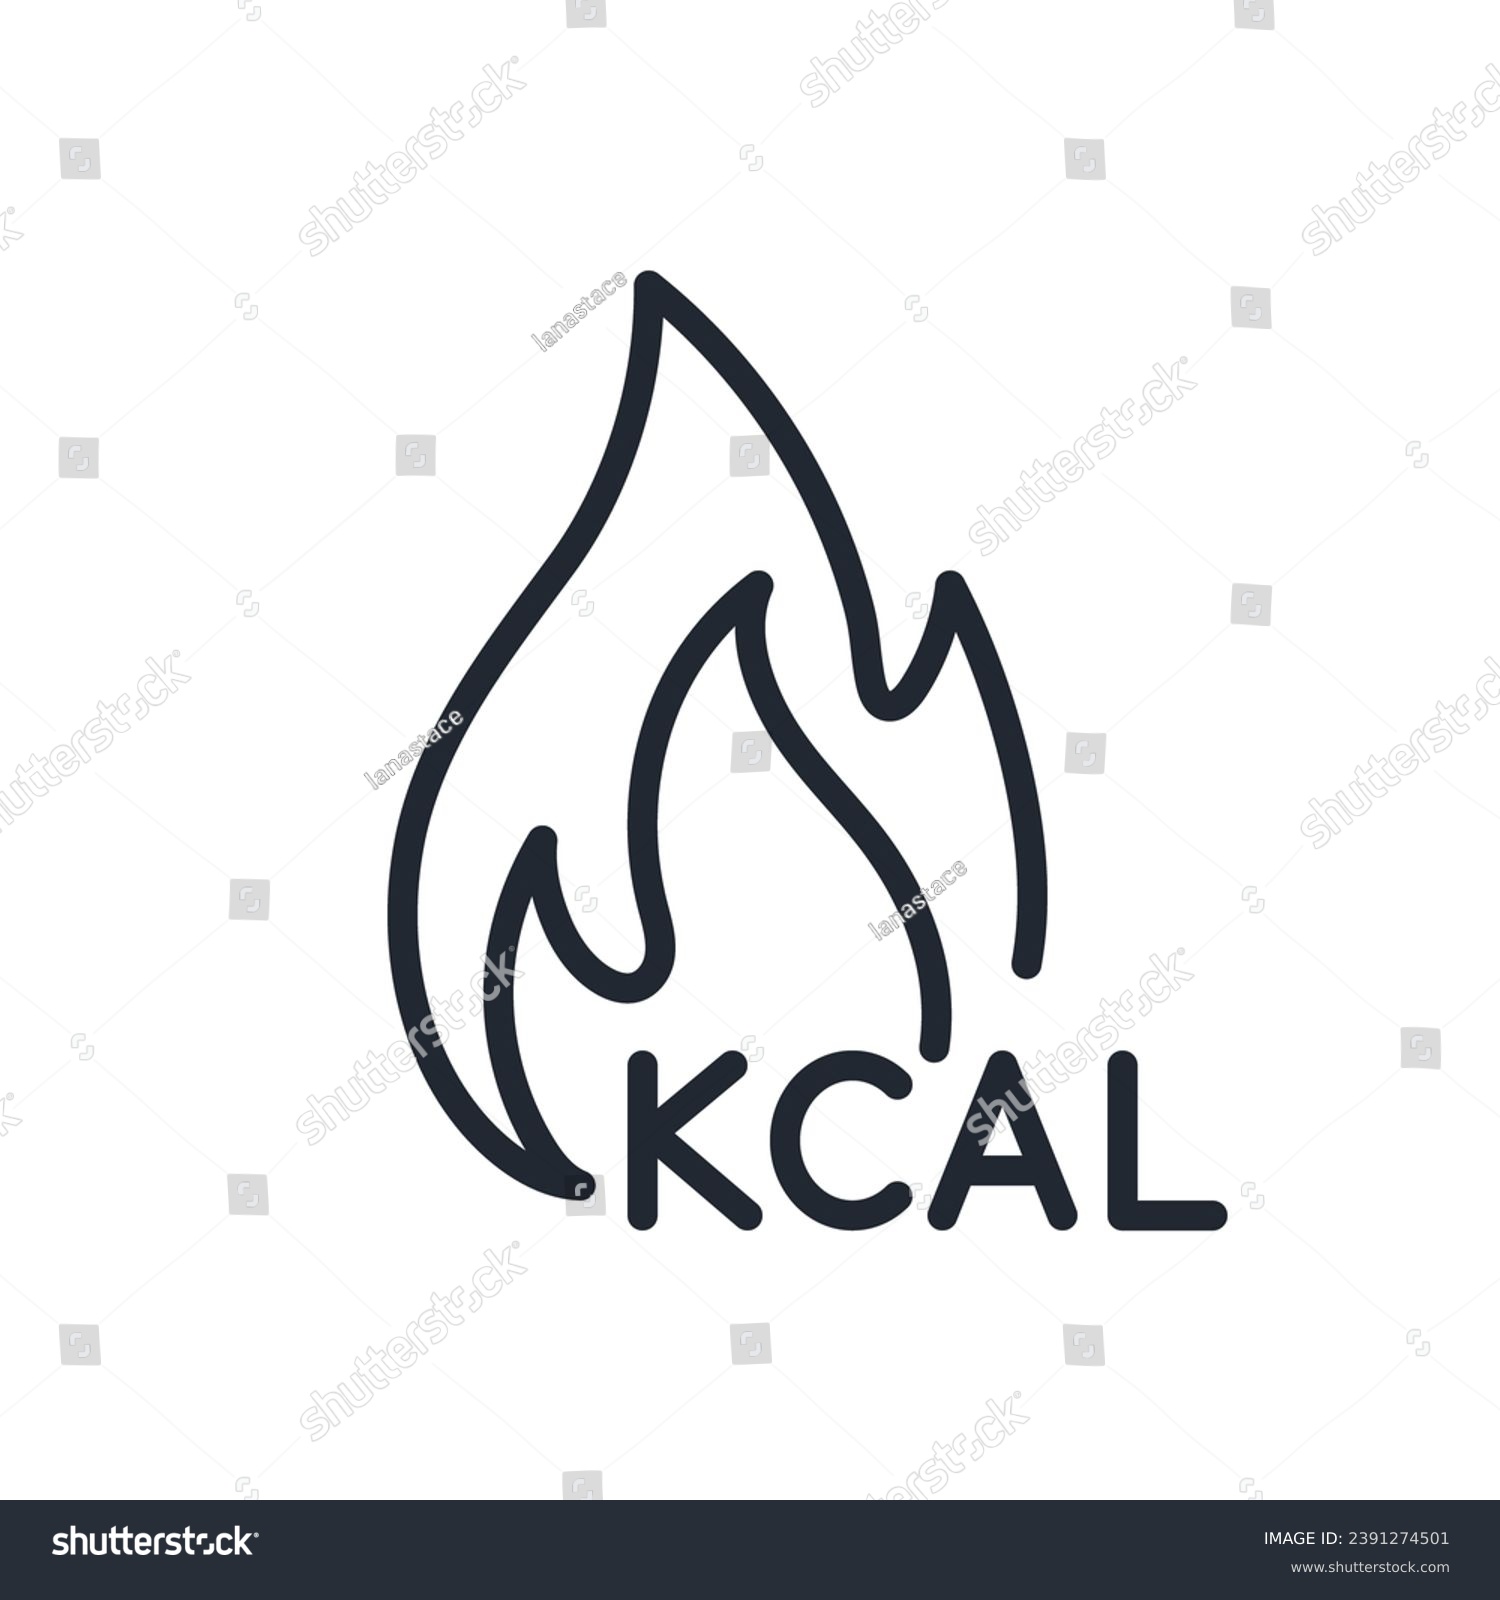 SVG of Kcal editable stroke outline icon isolated on white background flat vector illustration. Pixel perfect. 64 x 64. svg